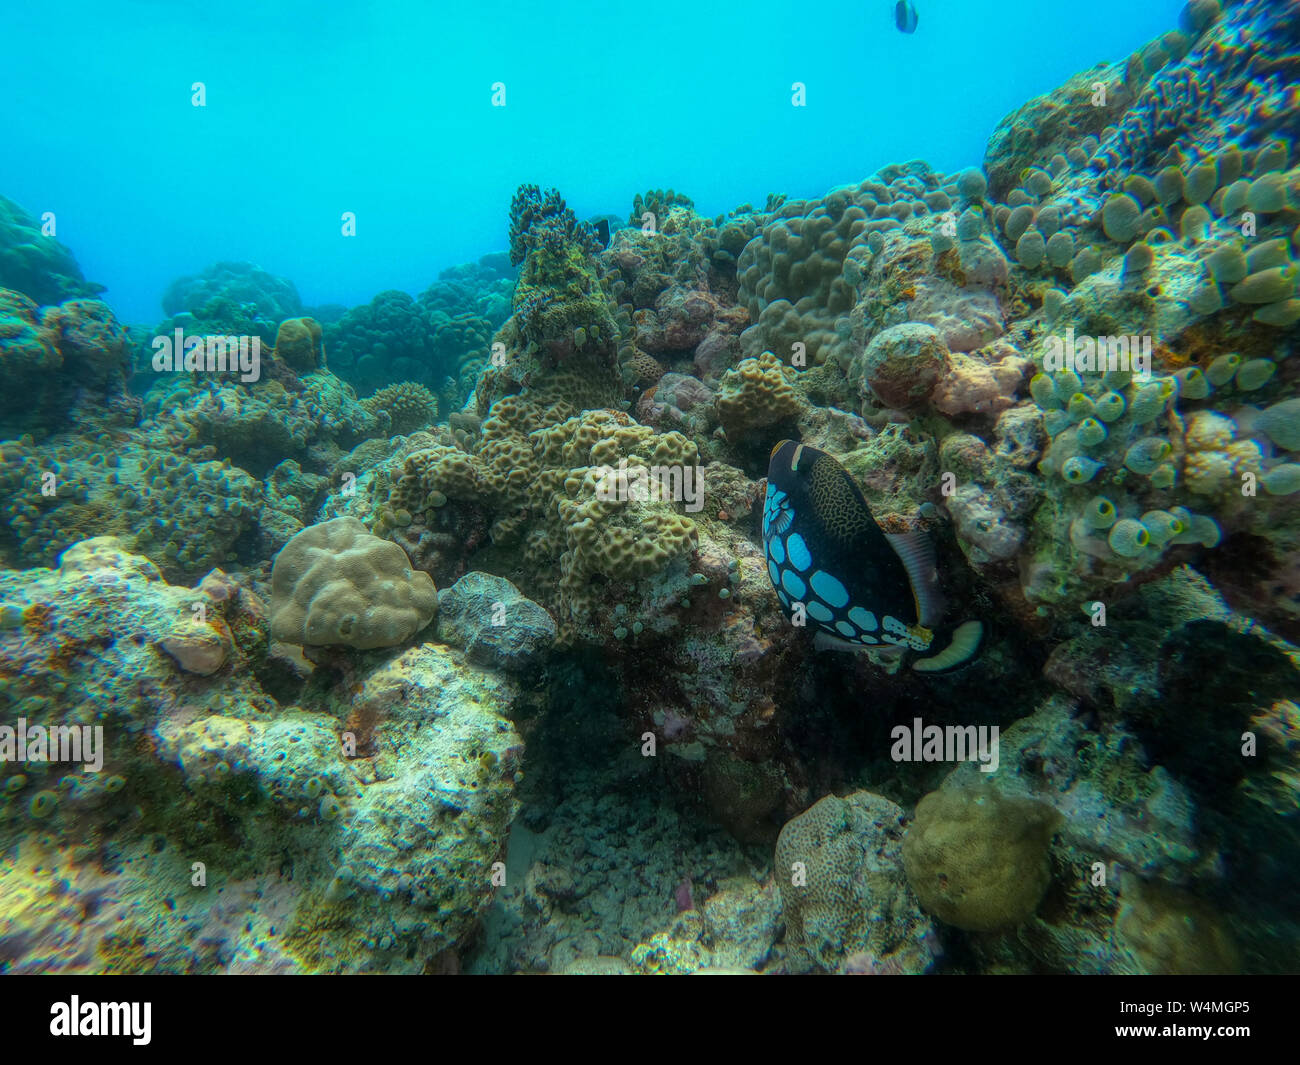 In this unique photo you can see the underwater world of the Pacific Ocean in the Maldives! Lots of coral and tropical fish! Stock Photo